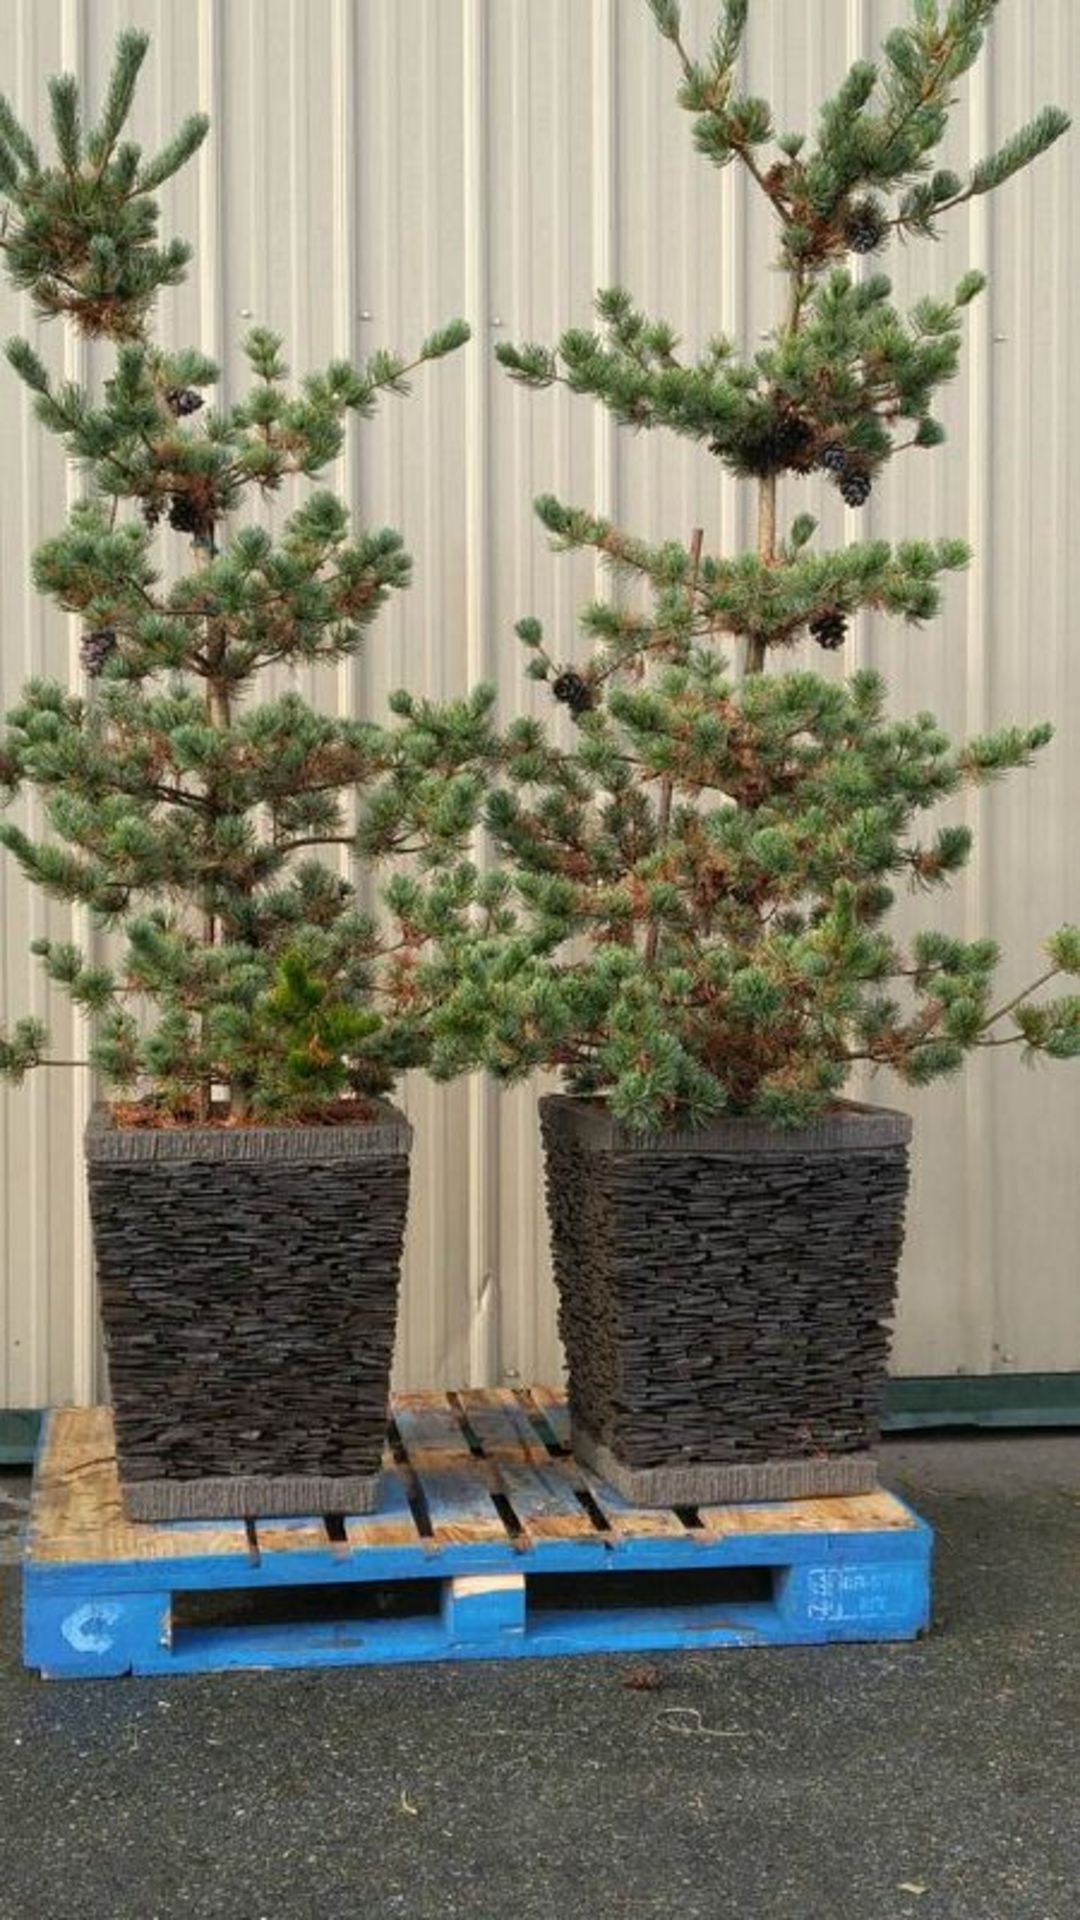 2 Live Potted Trees